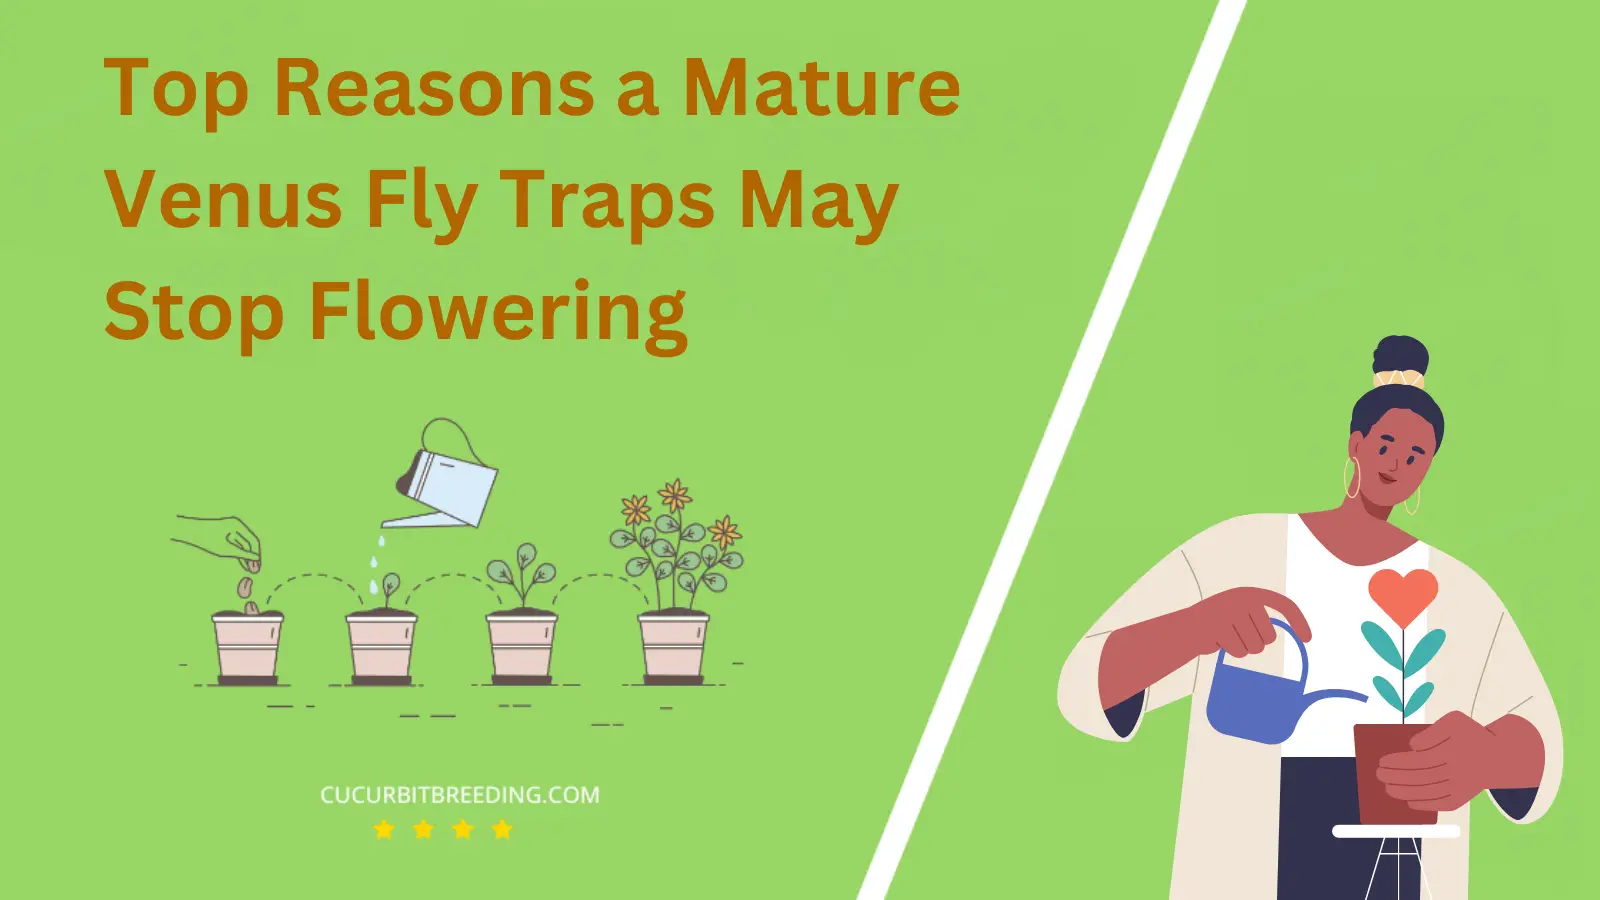 Top Reasons a Mature Venus Fly Traps May Stop Flowering